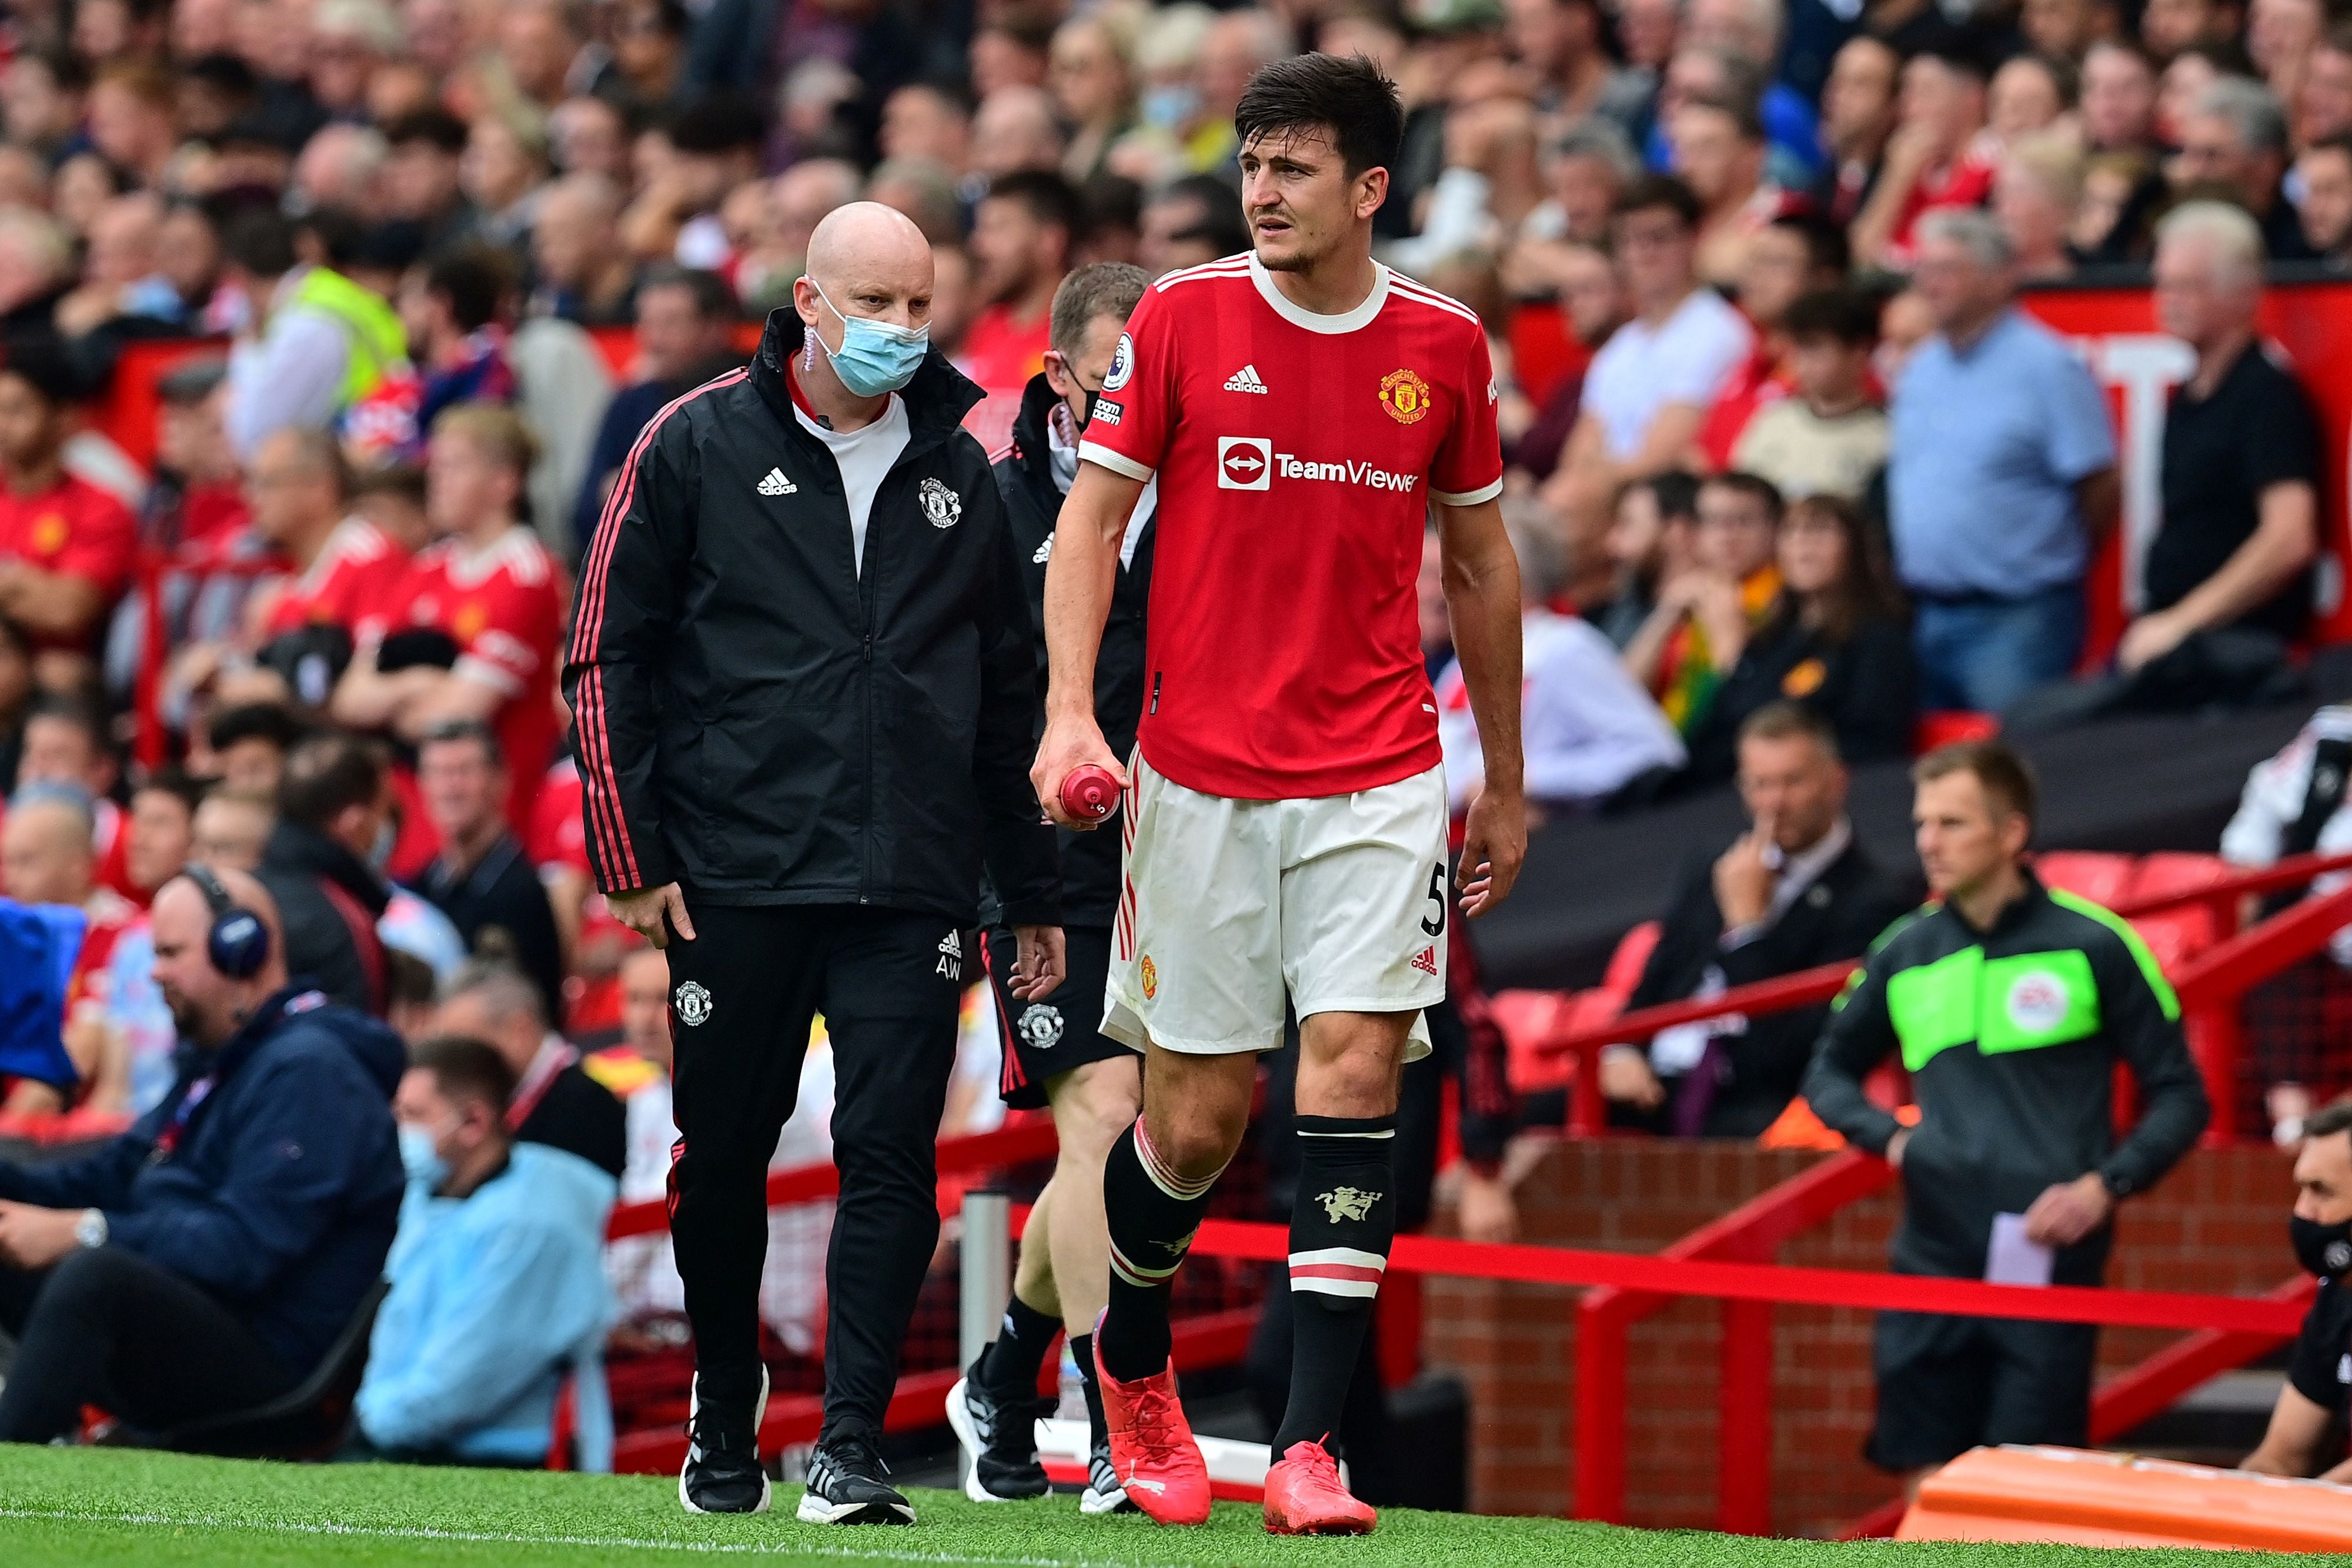 Harry Maguire appeared to suffer a calf injury